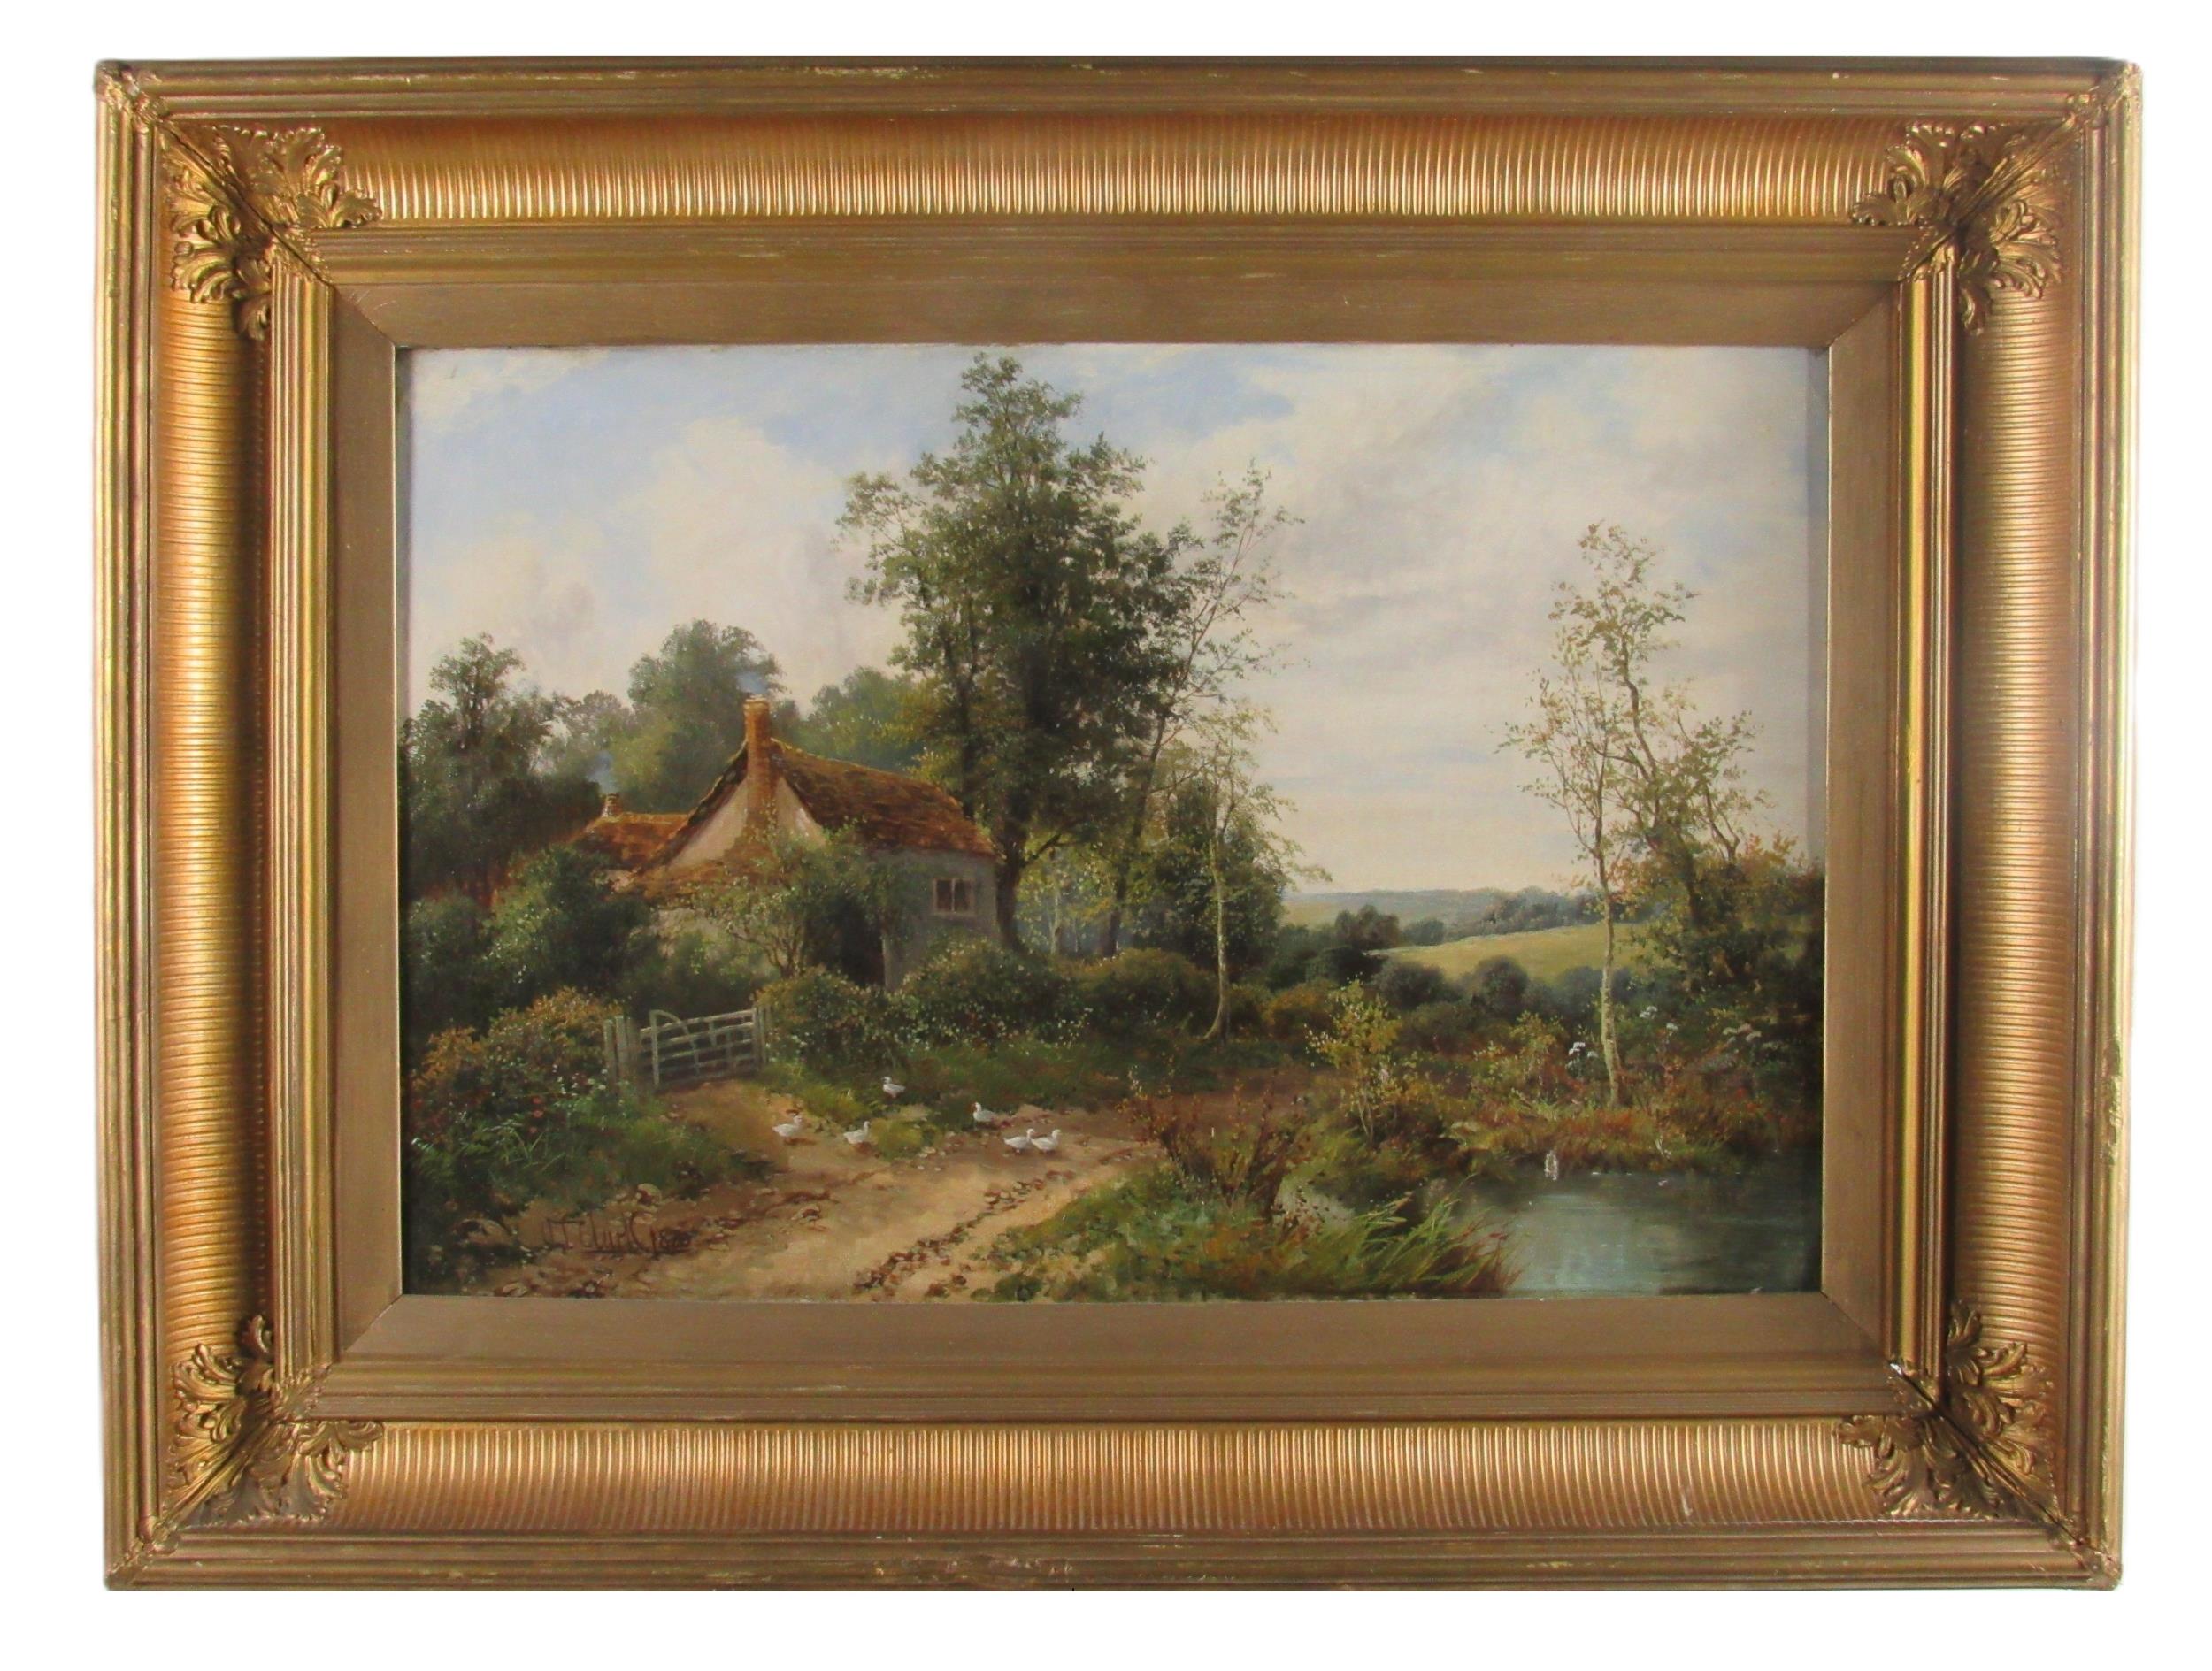 Octavius T. Clark, British (1850-1921) "British Landscape with Cottage in foreground and Figure at - Image 2 of 3